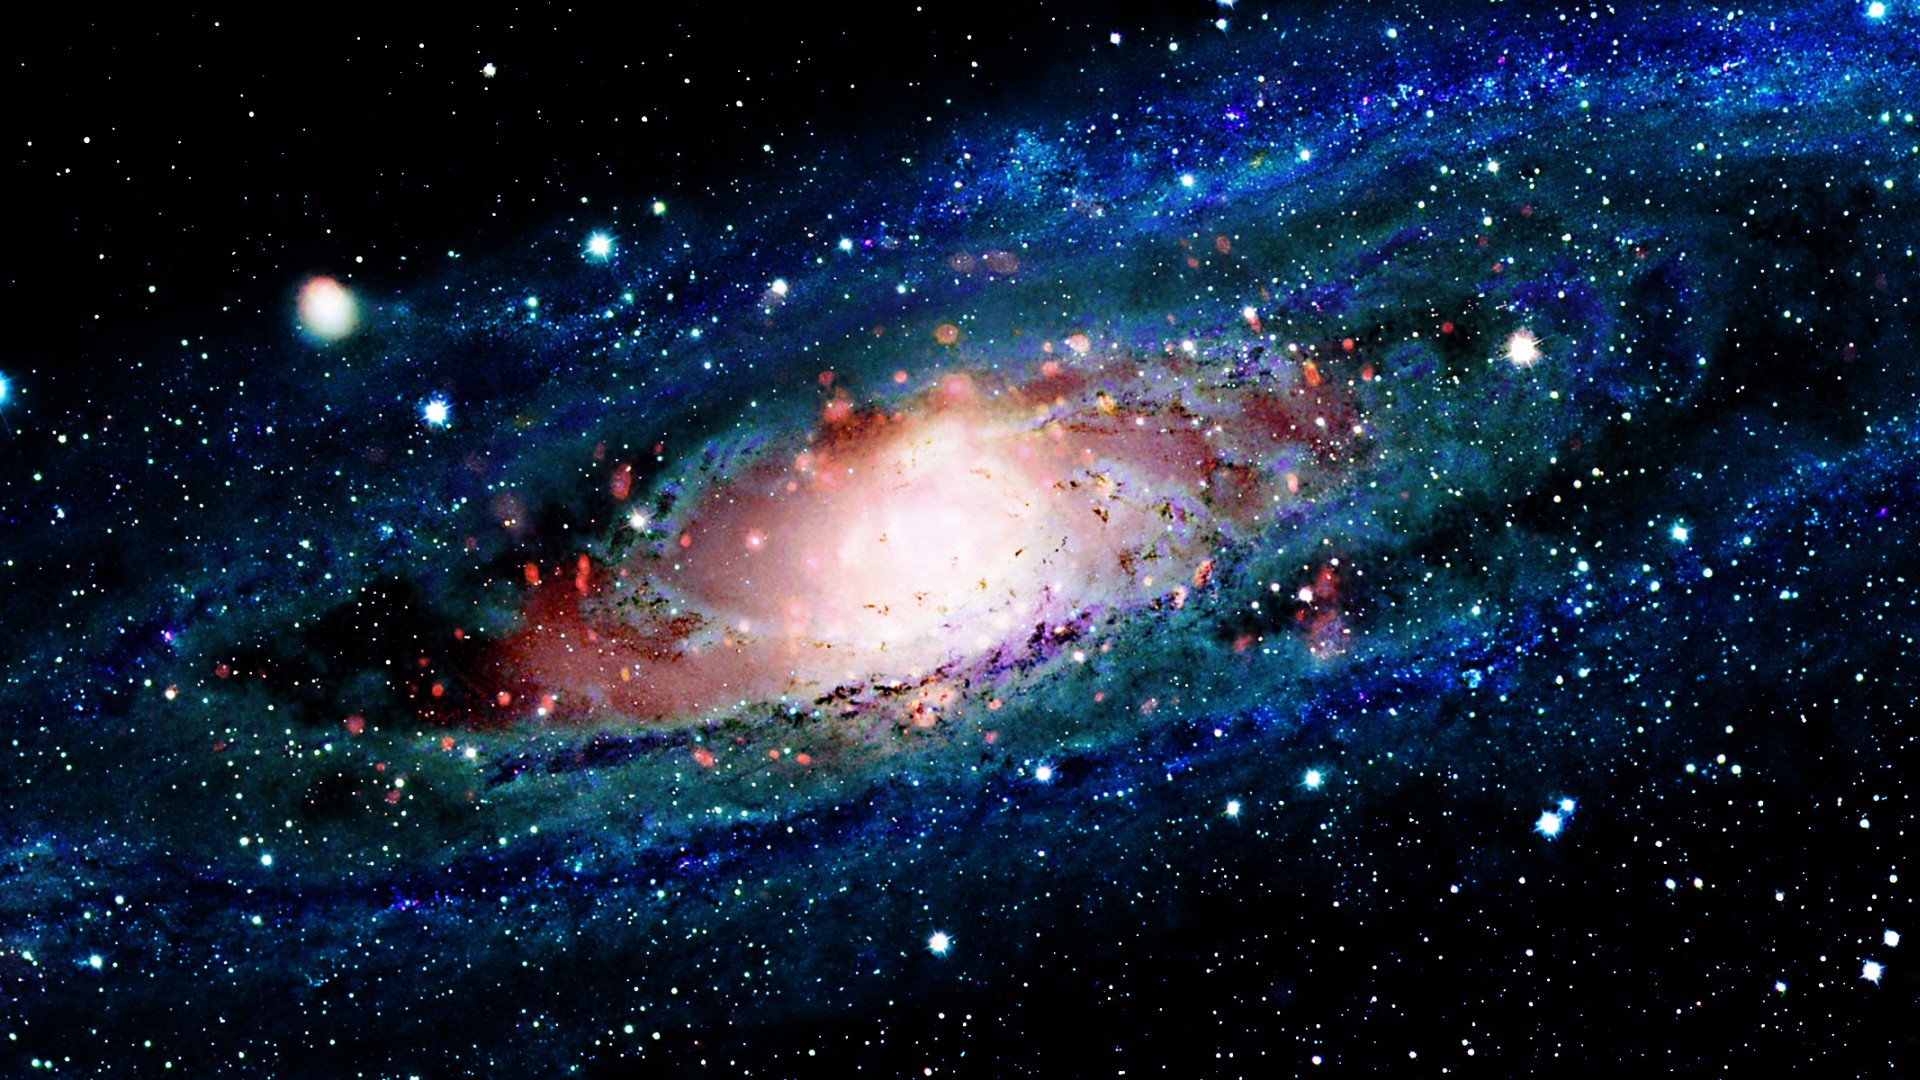 Galaxy wallpaper HD ·① Download free awesome HD wallpapers for desktop